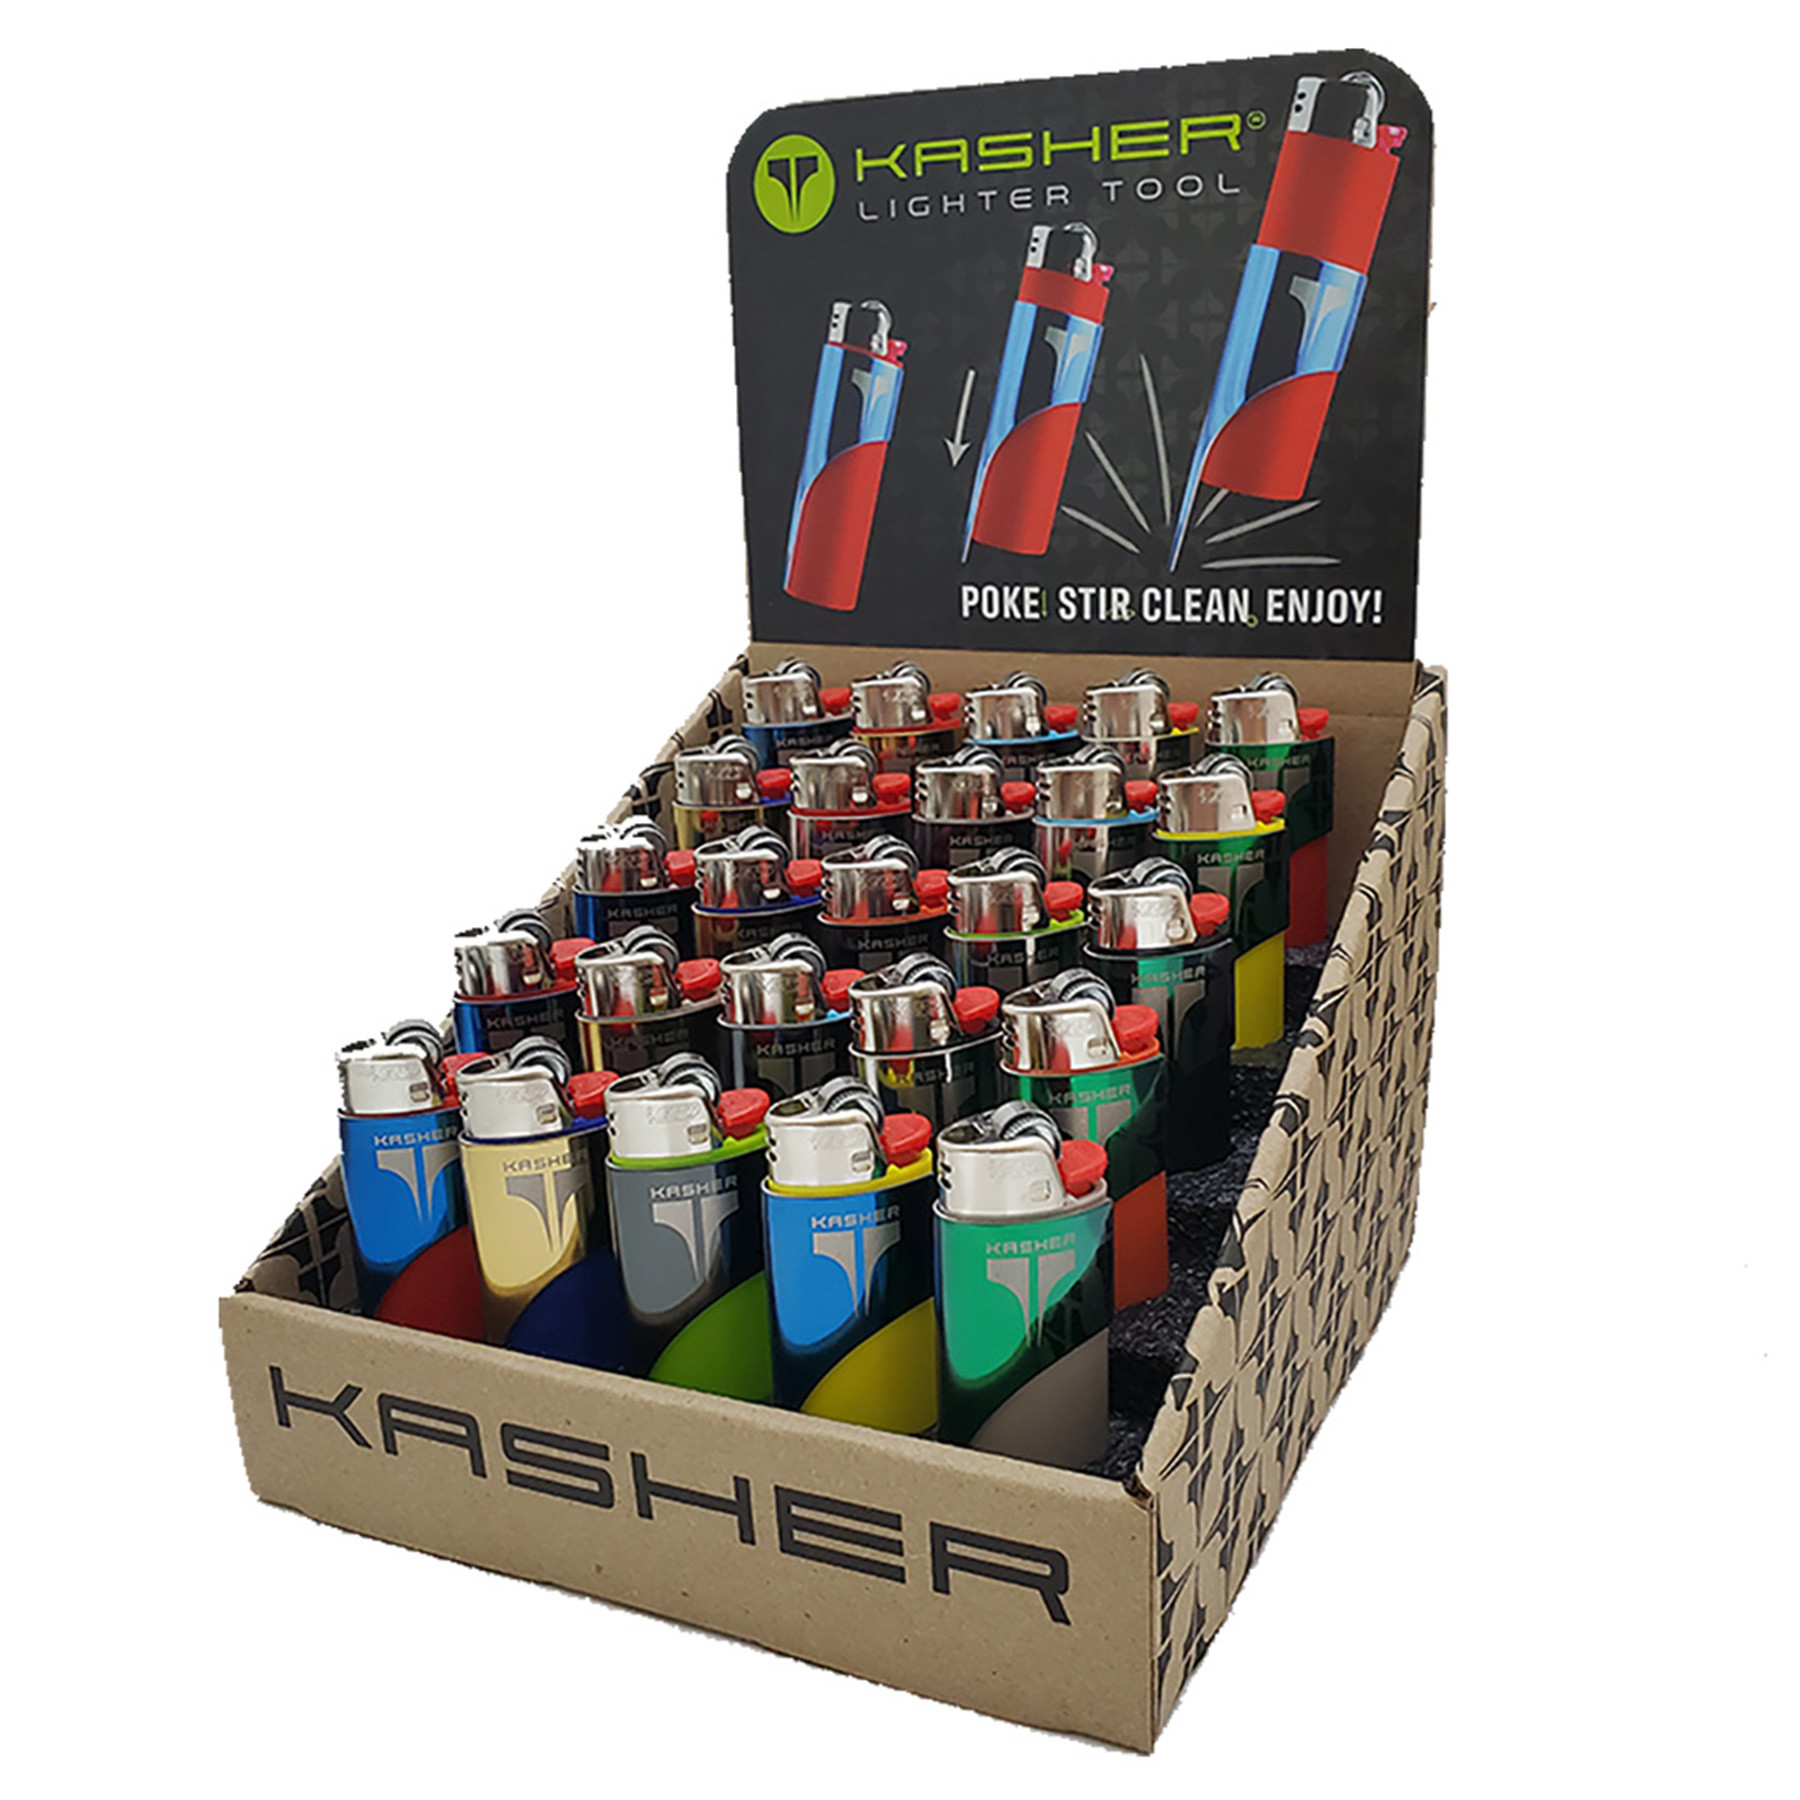 Kasher Classic W/Lighter (Display of 25)